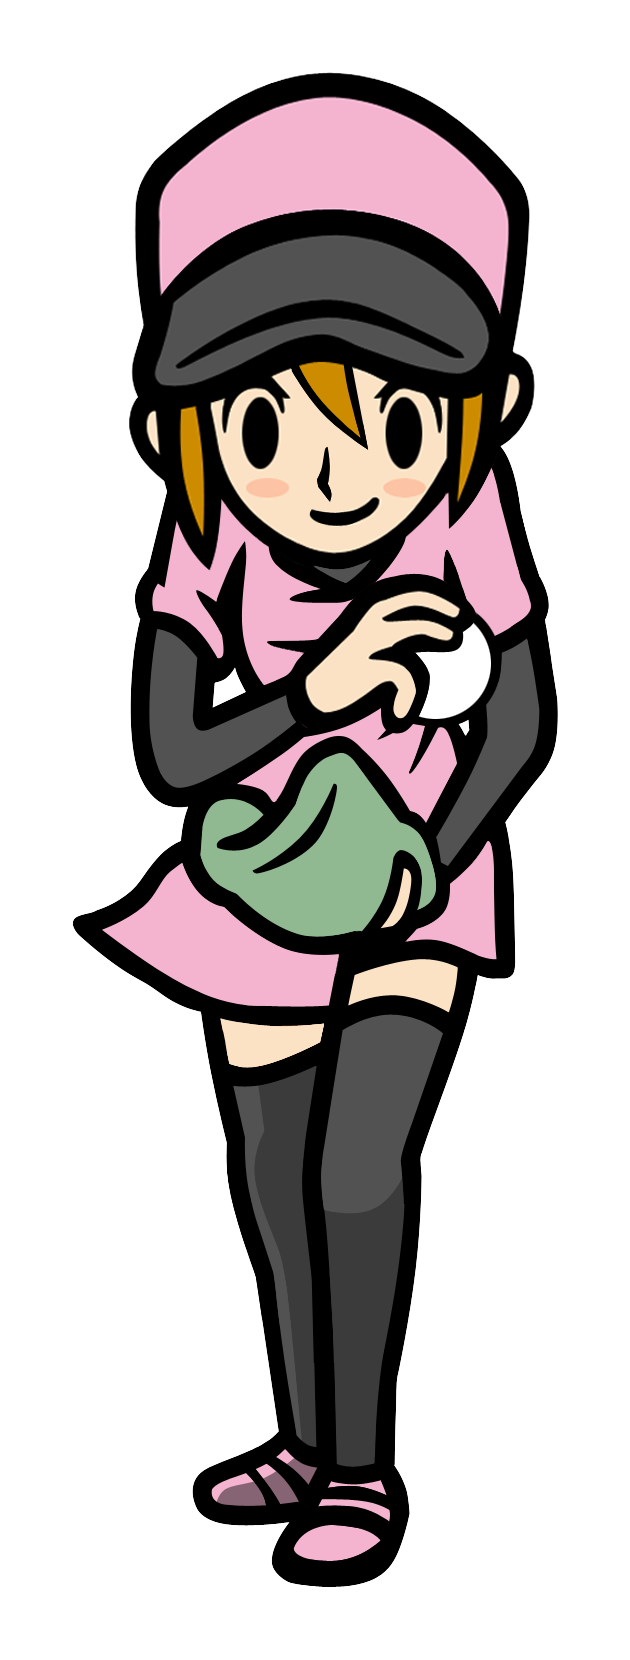 Character from rhythm heaven video game with a stylish outfit